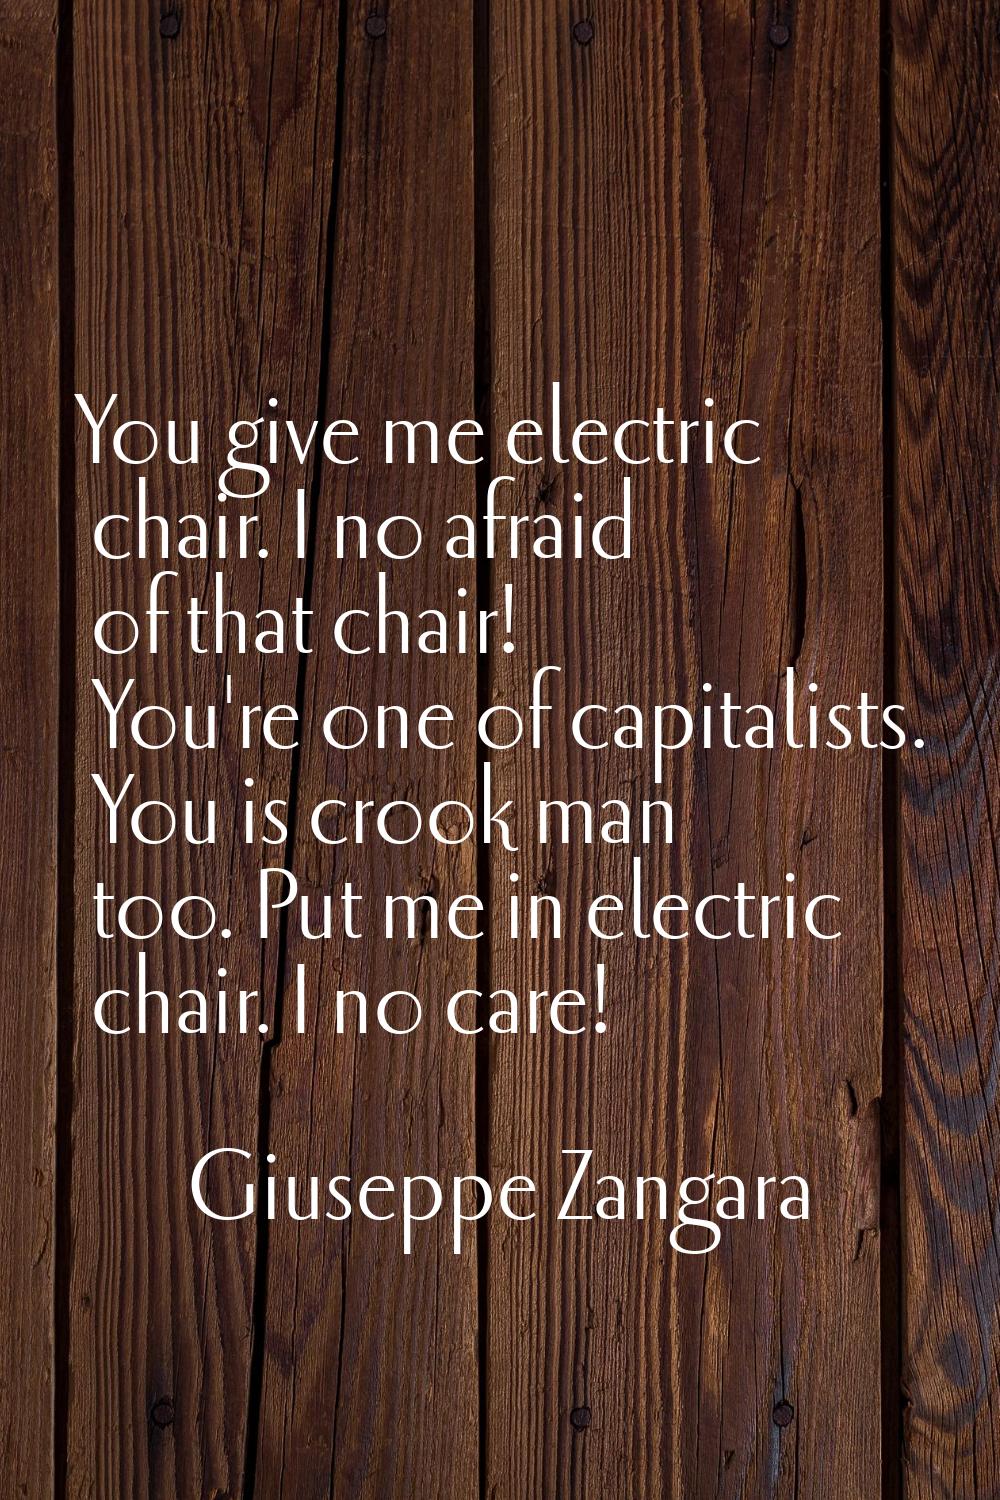 You give me electric chair. I no afraid of that chair! You're one of capitalists. You is crook man 